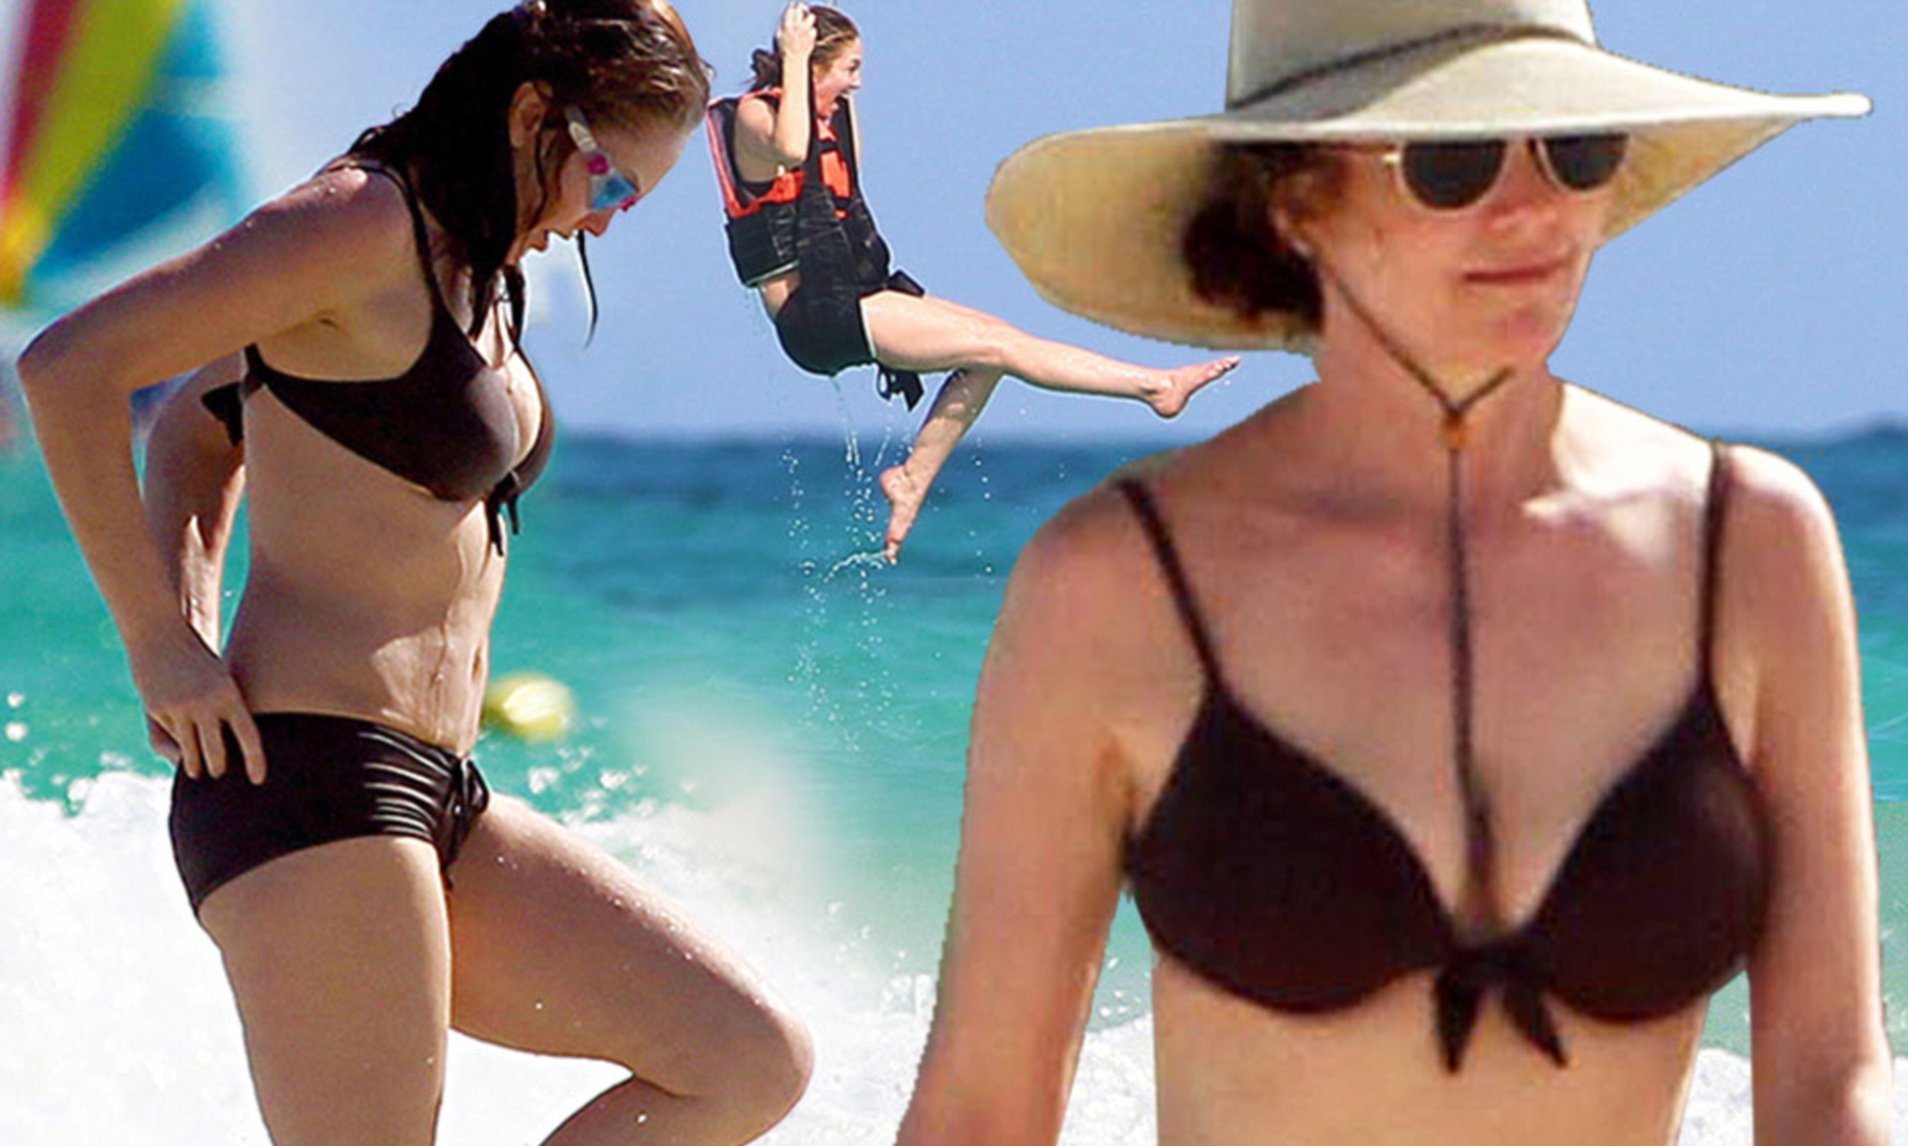 dicky indranardo recommends diane lane bathing suit pic